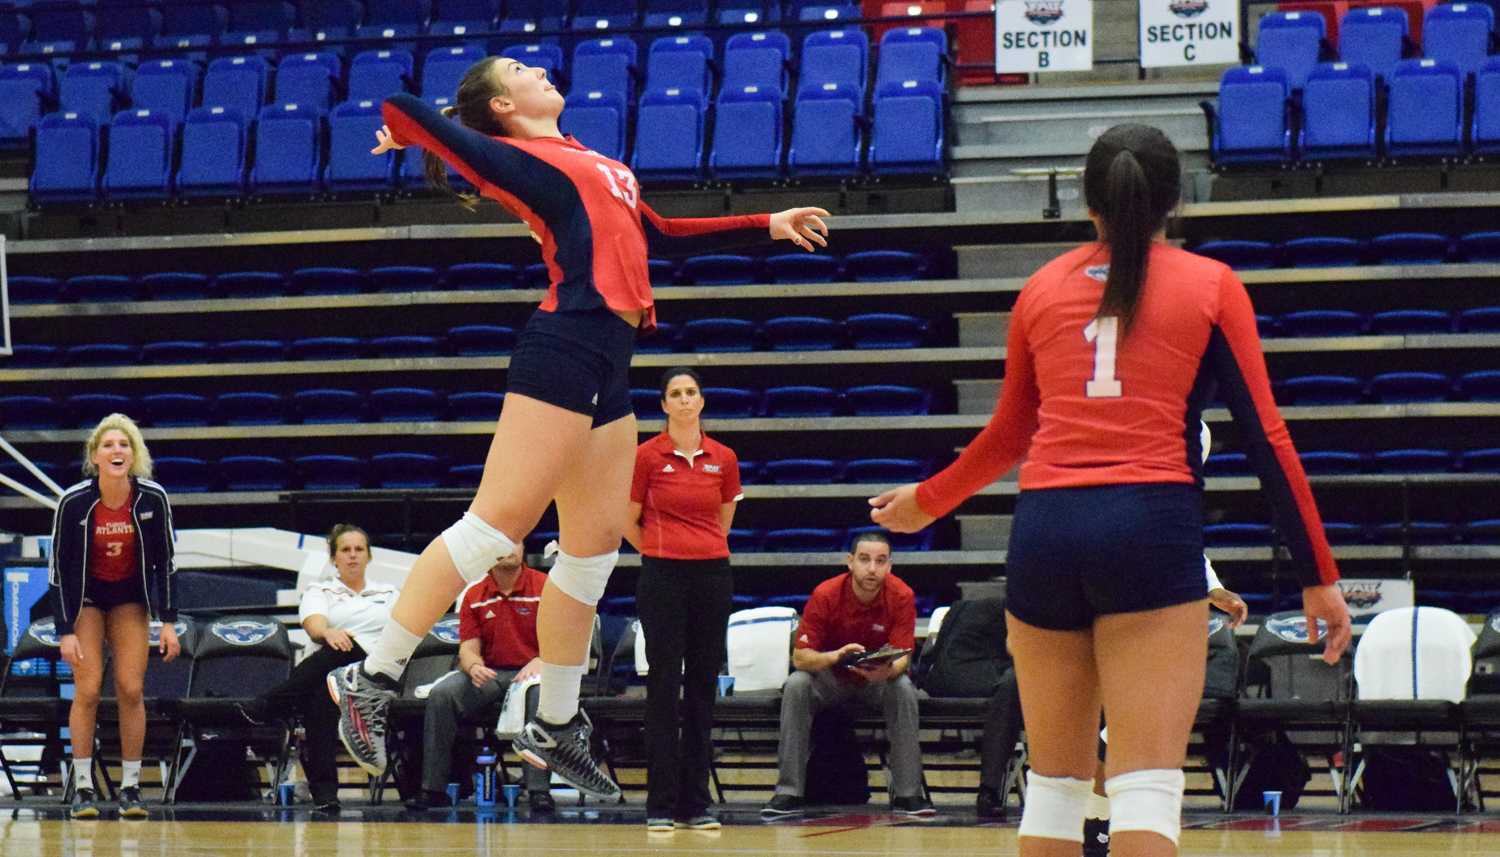 Maja Ristic prepares to spike the ball towards the UTEP side of the court during the Owls match Friday night. Ristic had 12 kills in the three game sweep, while also registering a double-double with 11 digs. Ryan Lynch | Sports Editor 